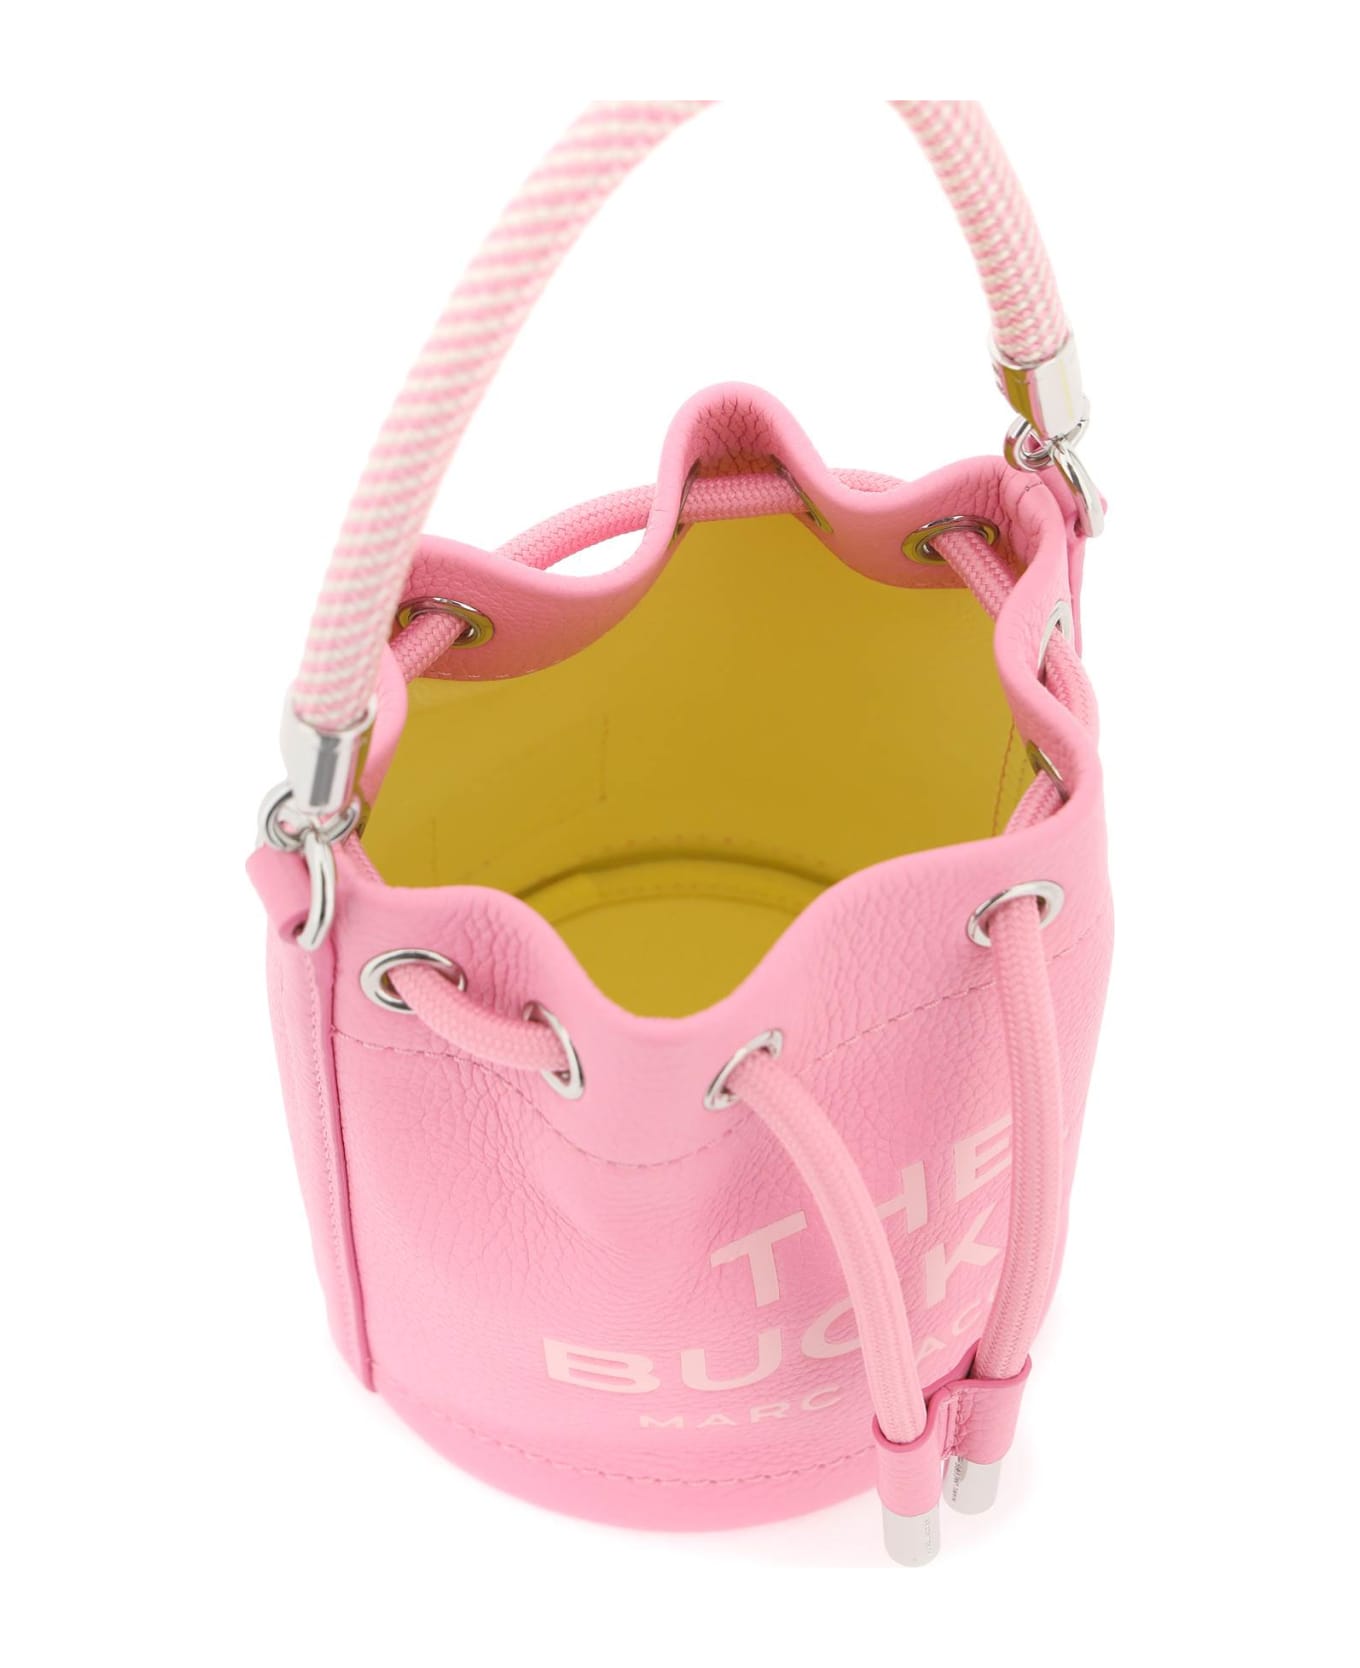 Marc Jacobs The Leather Bucket Bag - PETAL PINK (Pink)